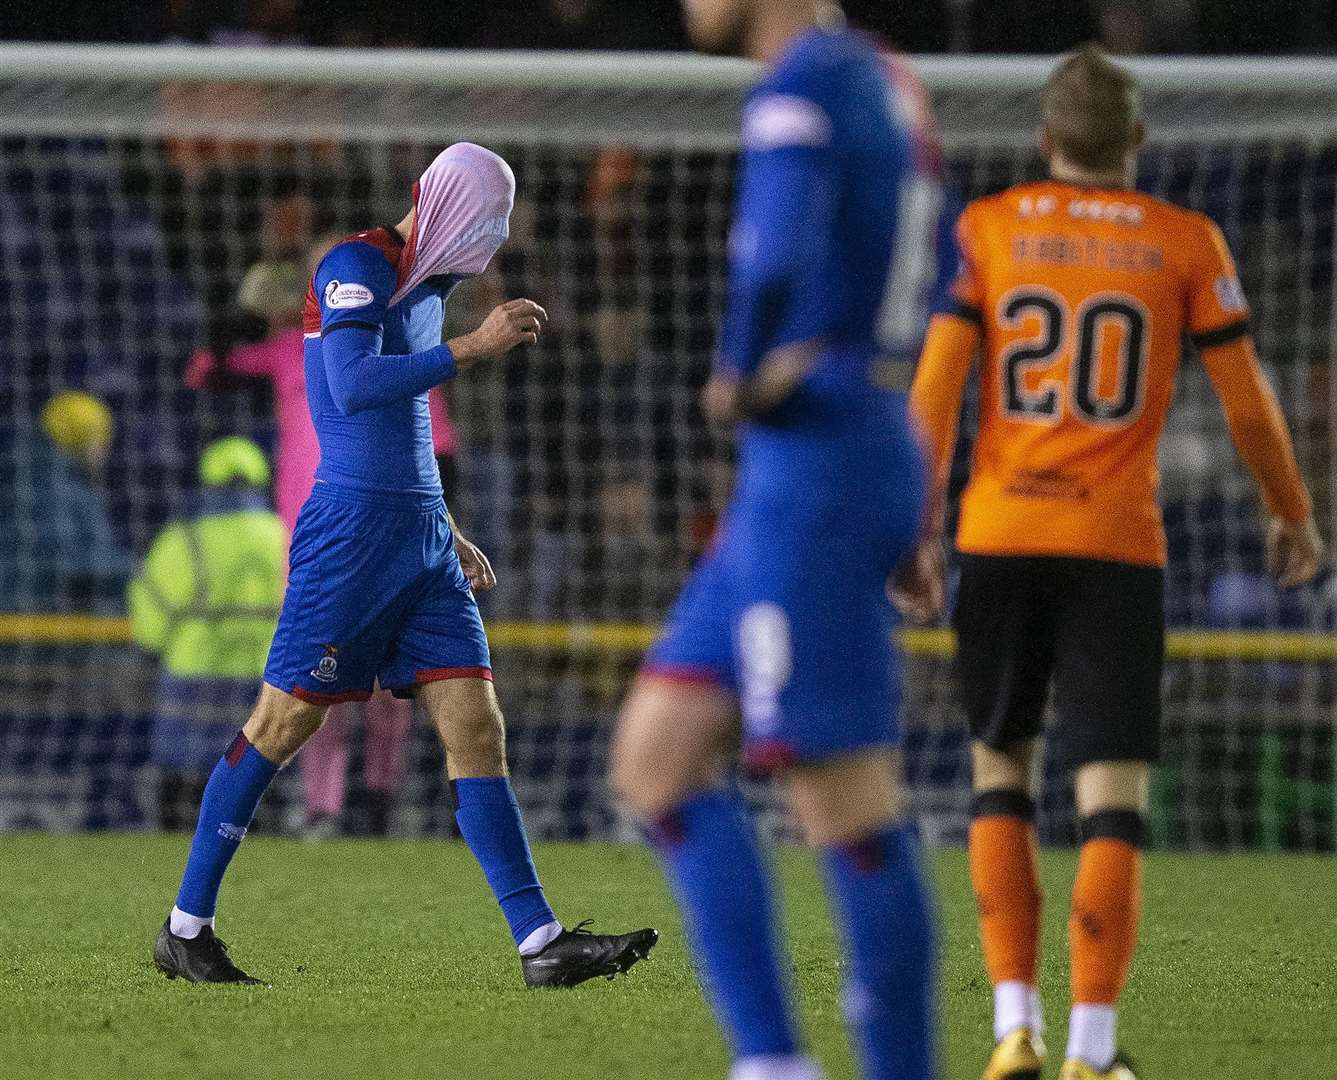 Inverness Caledonian Thistle's promotion dreams were ended after they were knocked out of the play-offs by Dundee United. Picture: Ken Macpherson